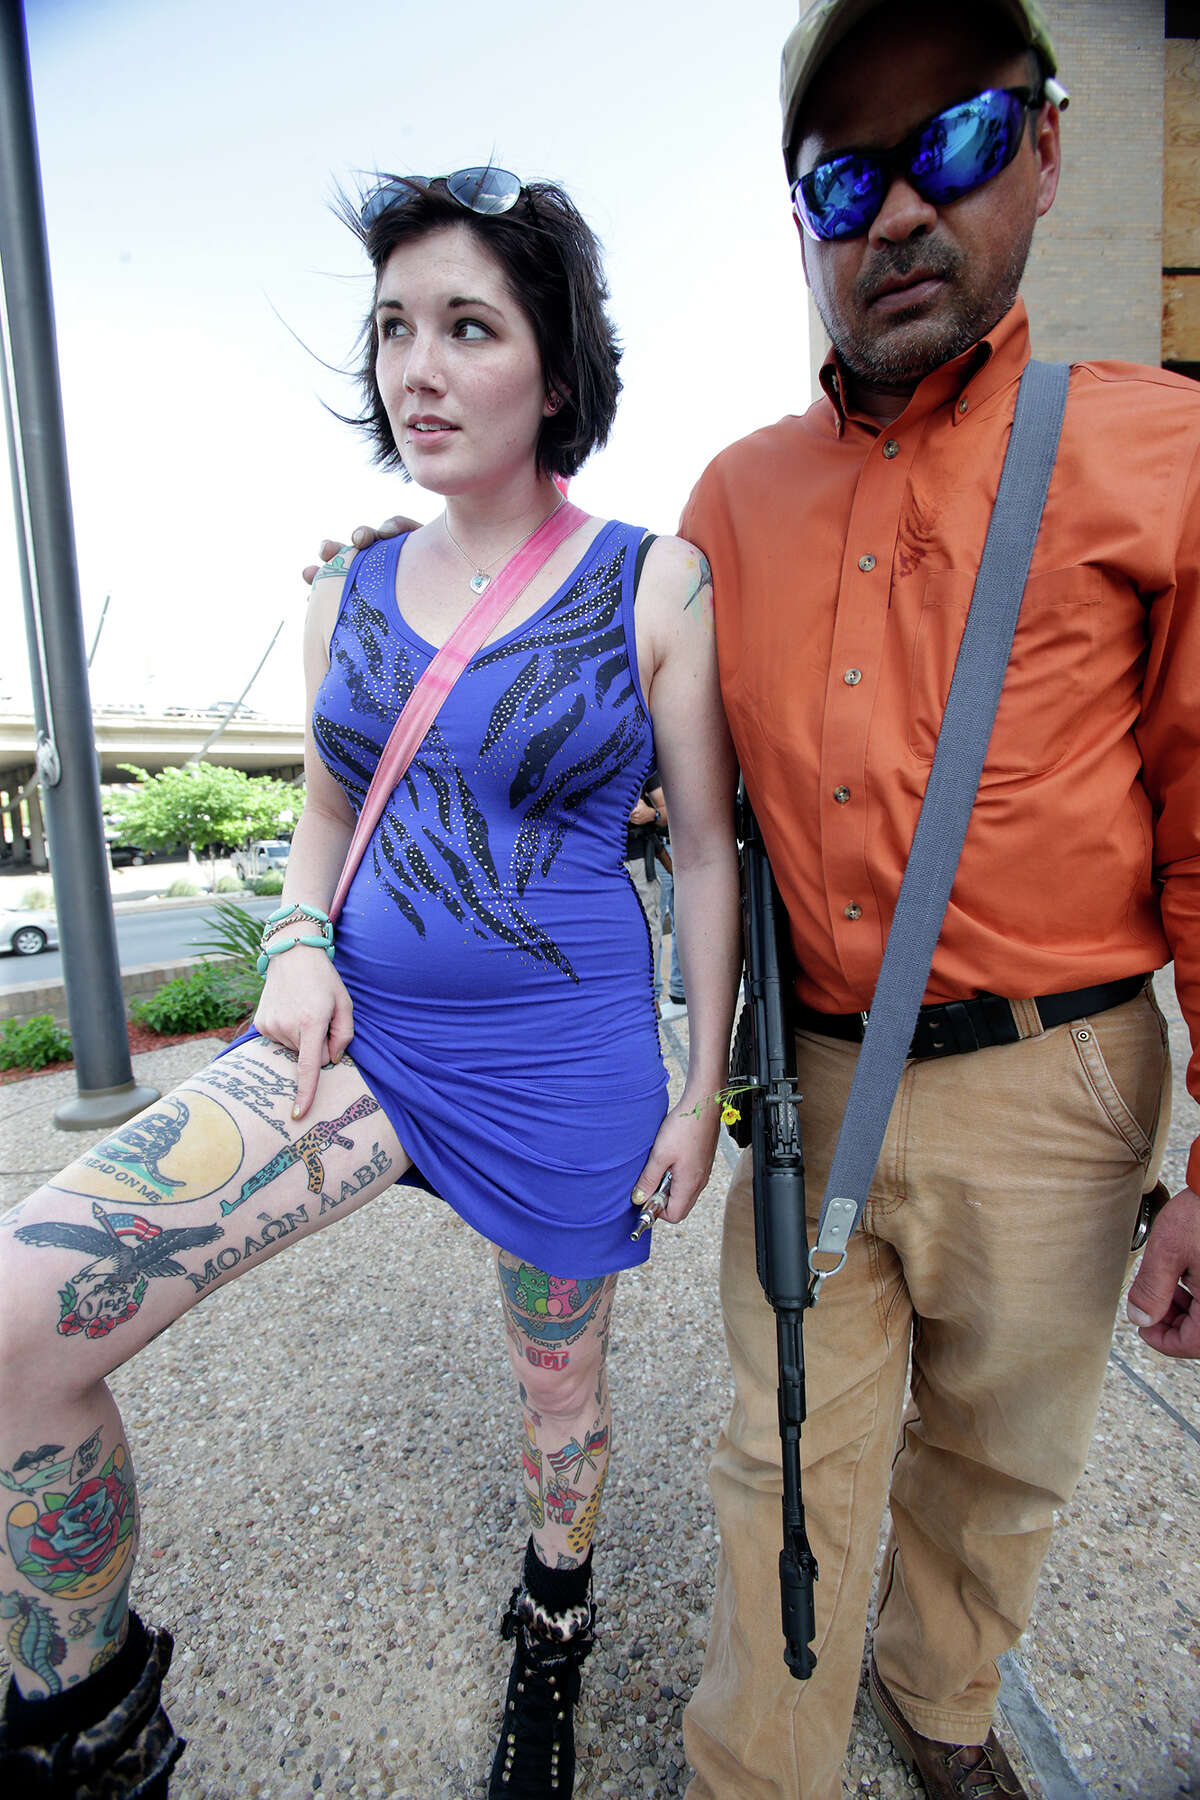 Victoria Montgomery shows a fresh rifle tattoo with friend Ronald Young as Texas Open Carry demonstrators gather on the steps of the Austin Police Department to take issue with Police Chief Art Acevedo's stance on the topic of firearm carrying on May 6, 2015.